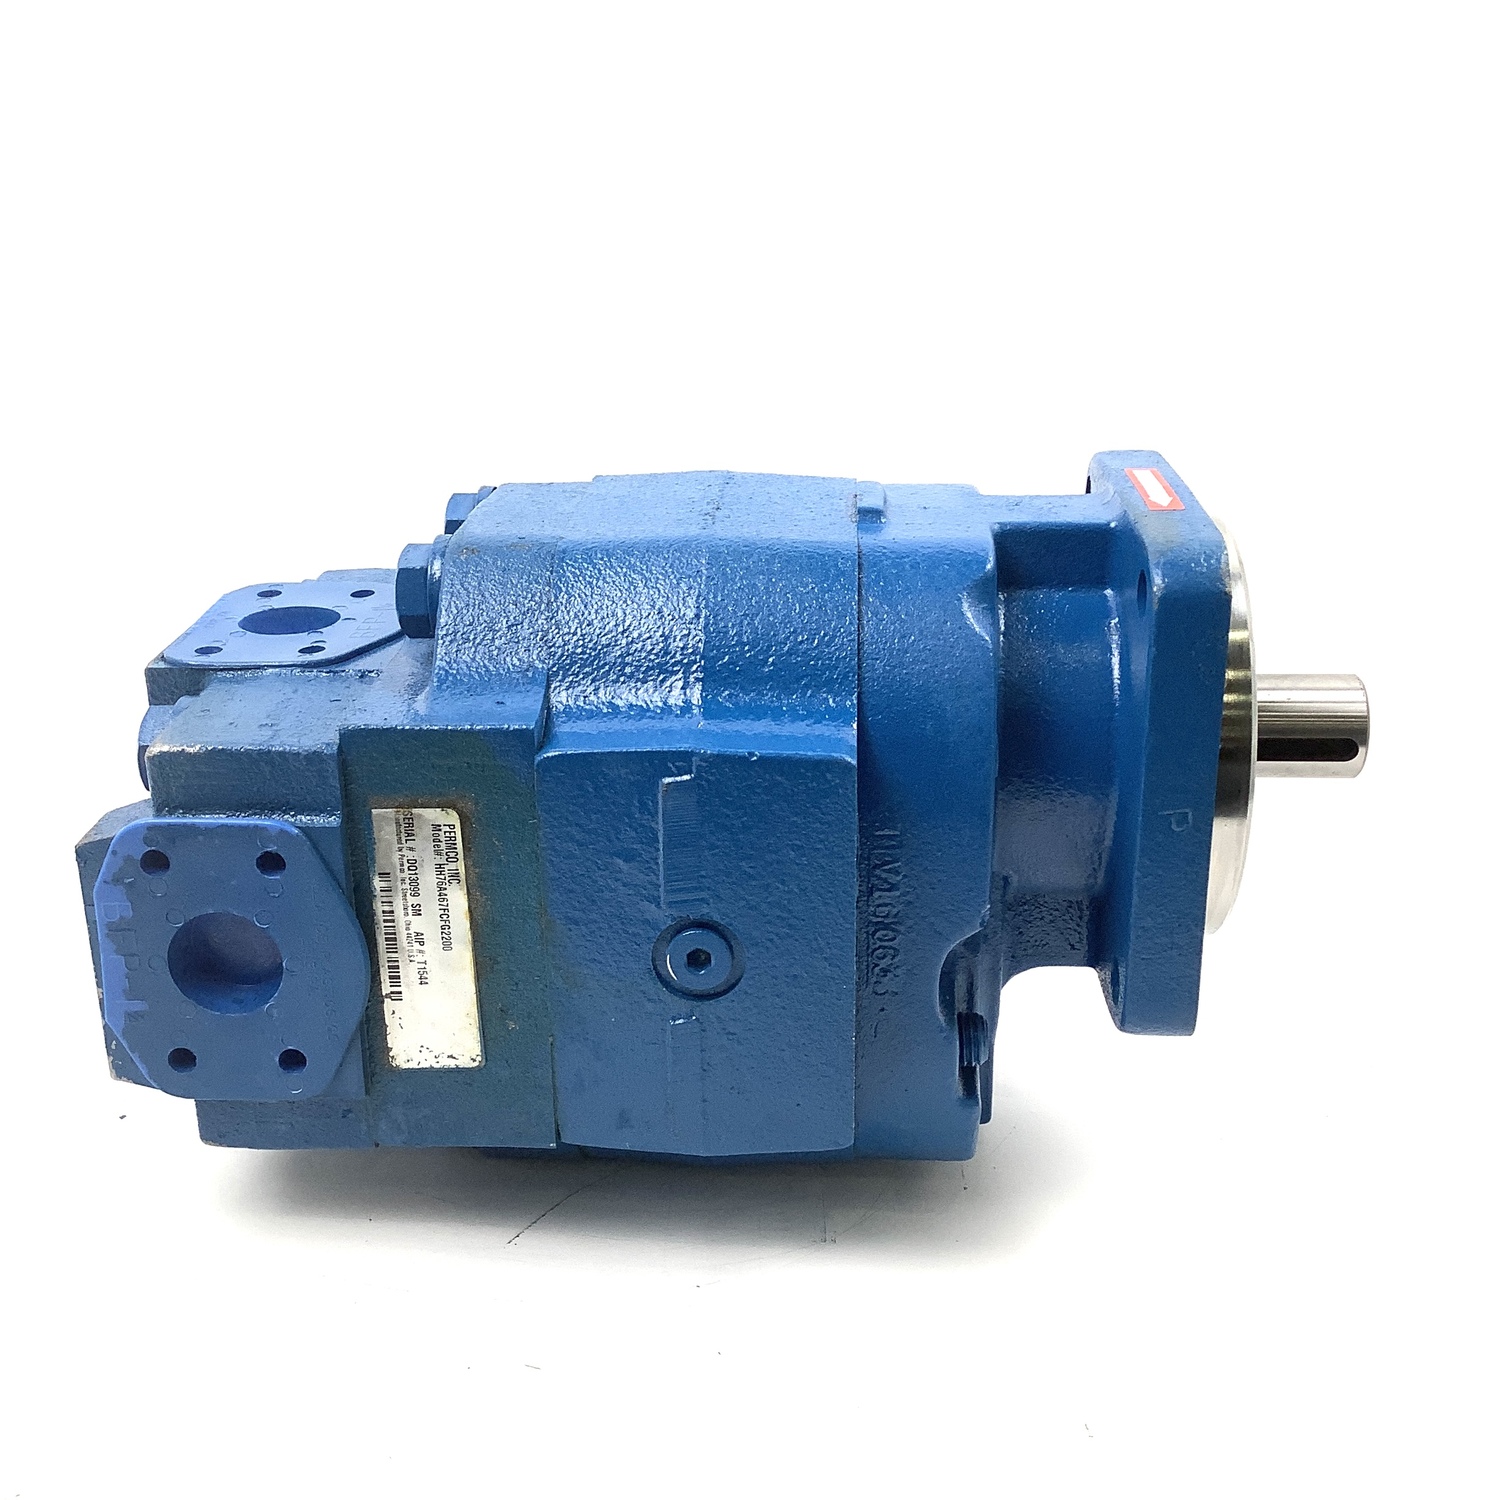 permco <a href='https://www.ruidapetroleum.com/product/47'>hydraulic</a> <a href='https://www.ruidapetroleum.com/product/49'>pump</a> cross reference quotation